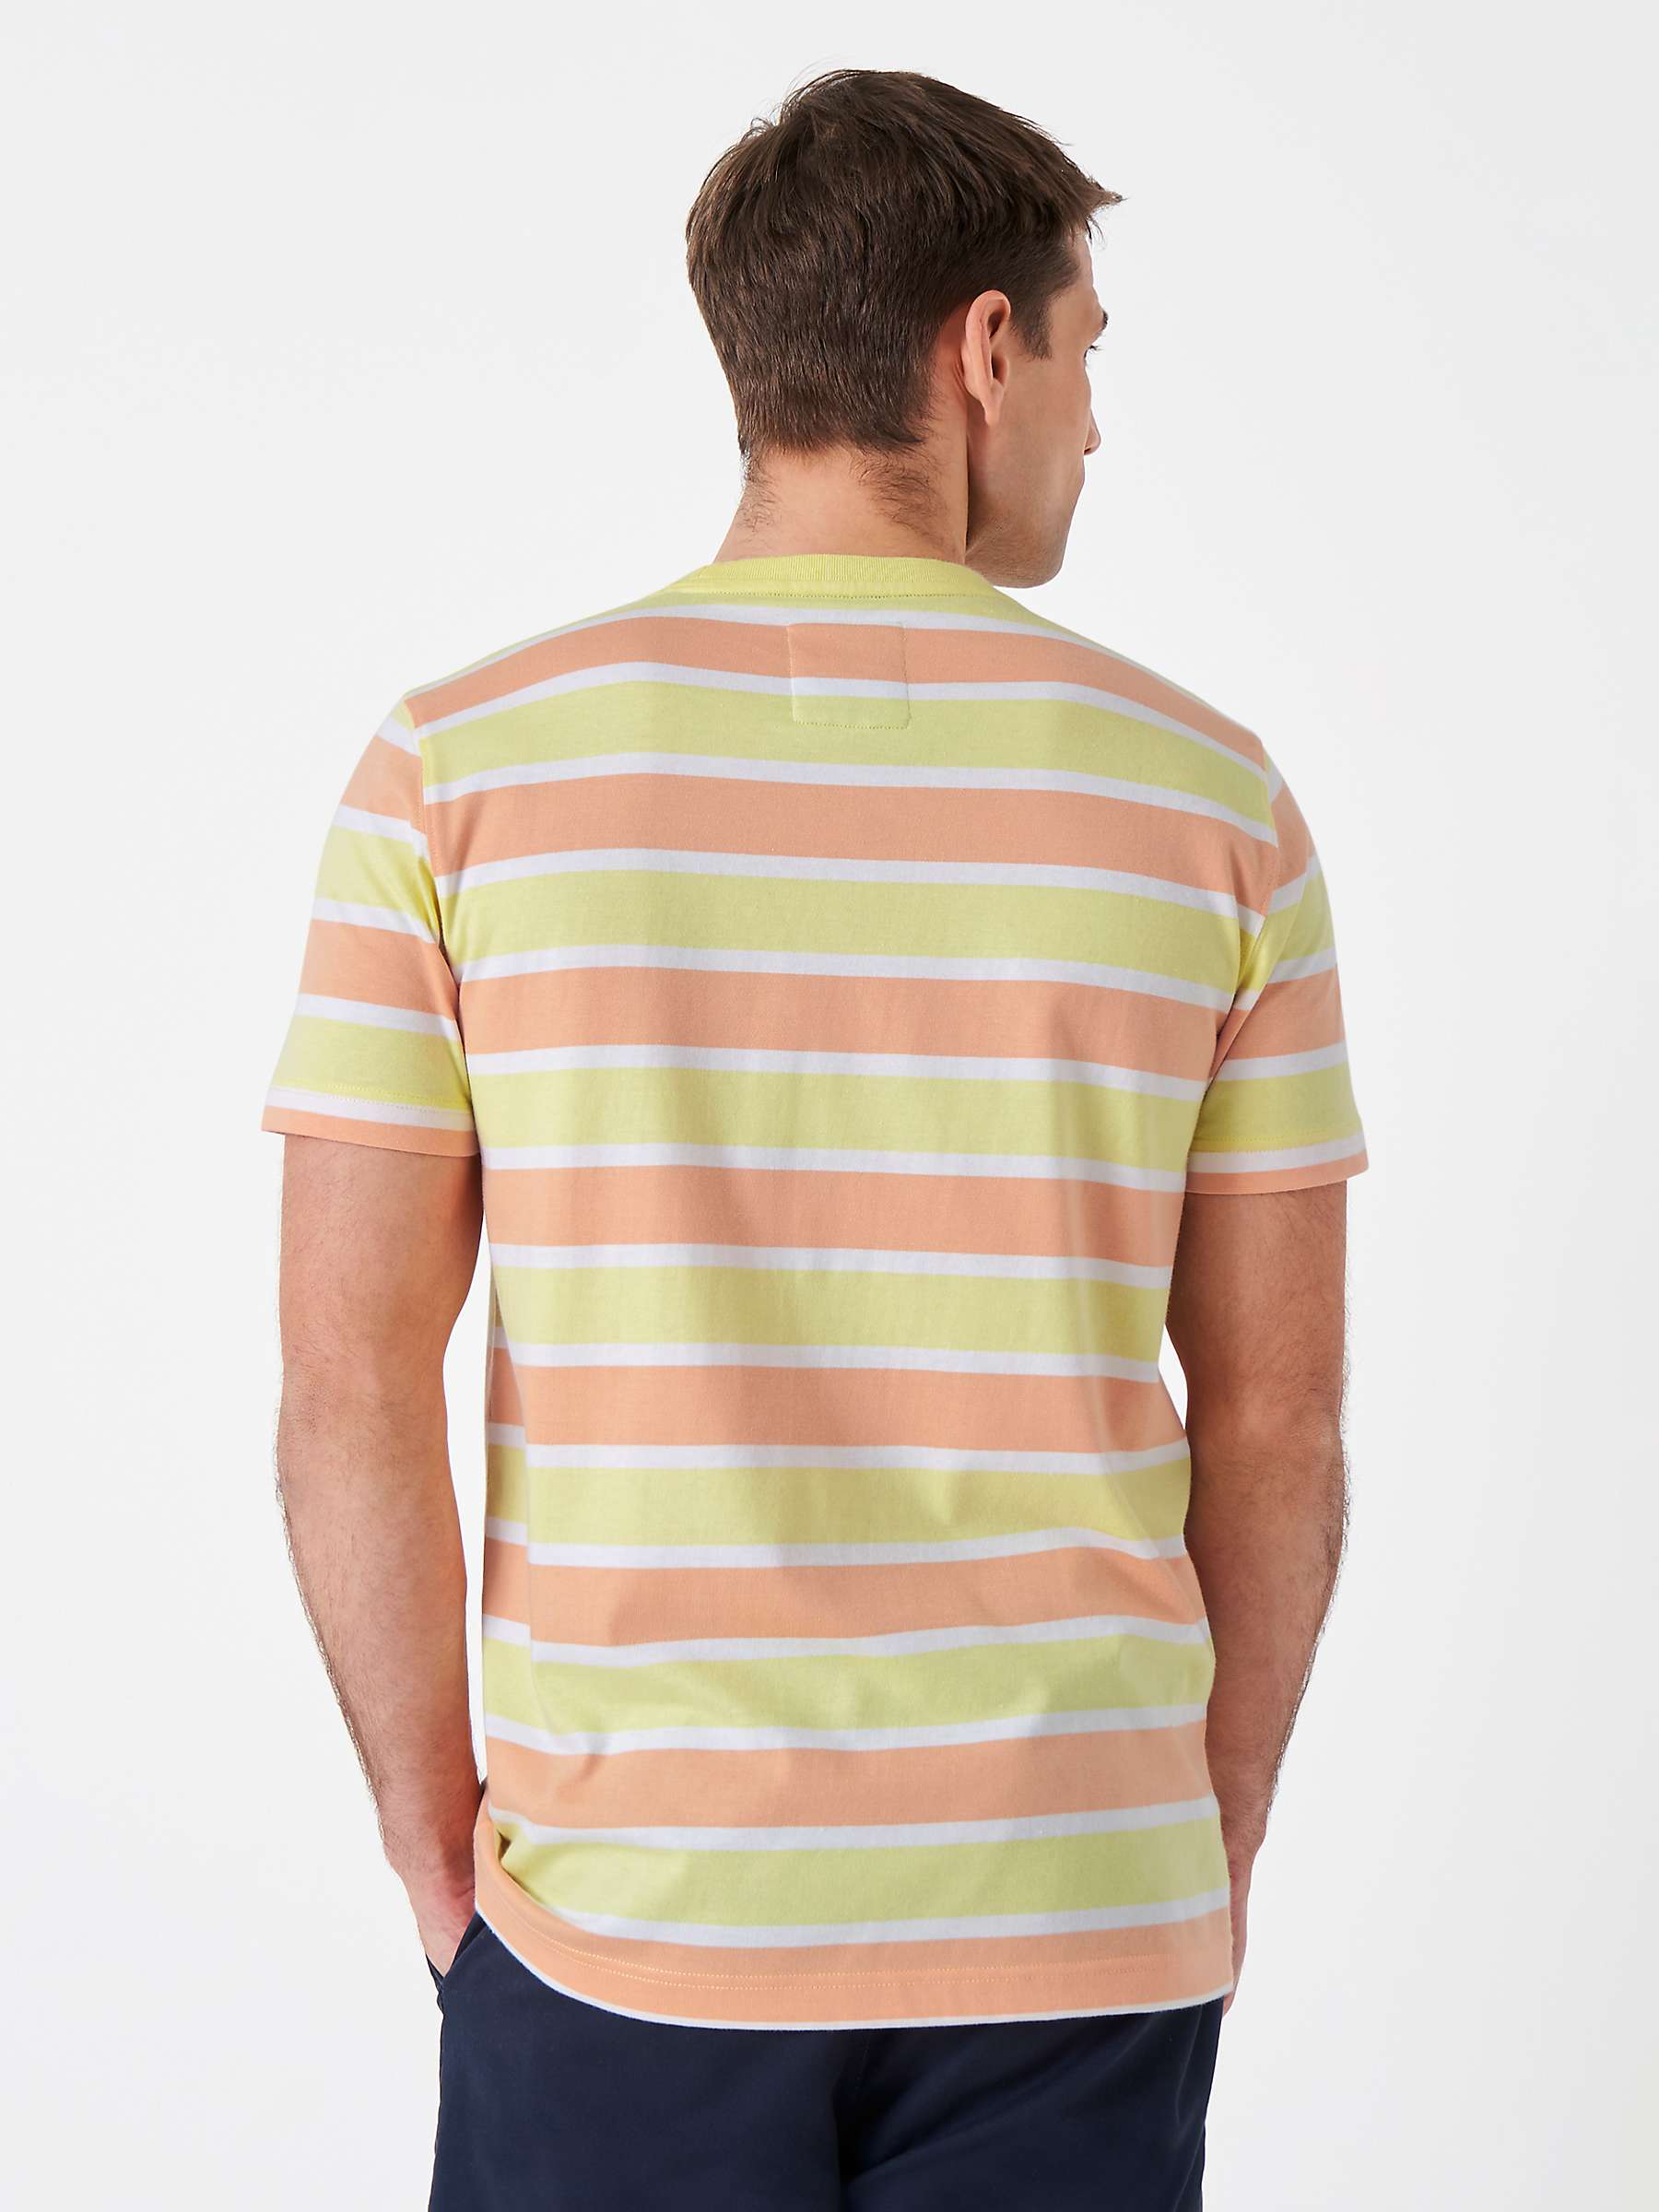 Buy Crew Clothing Haxby Stripe Cotton T-Shirt Online at johnlewis.com